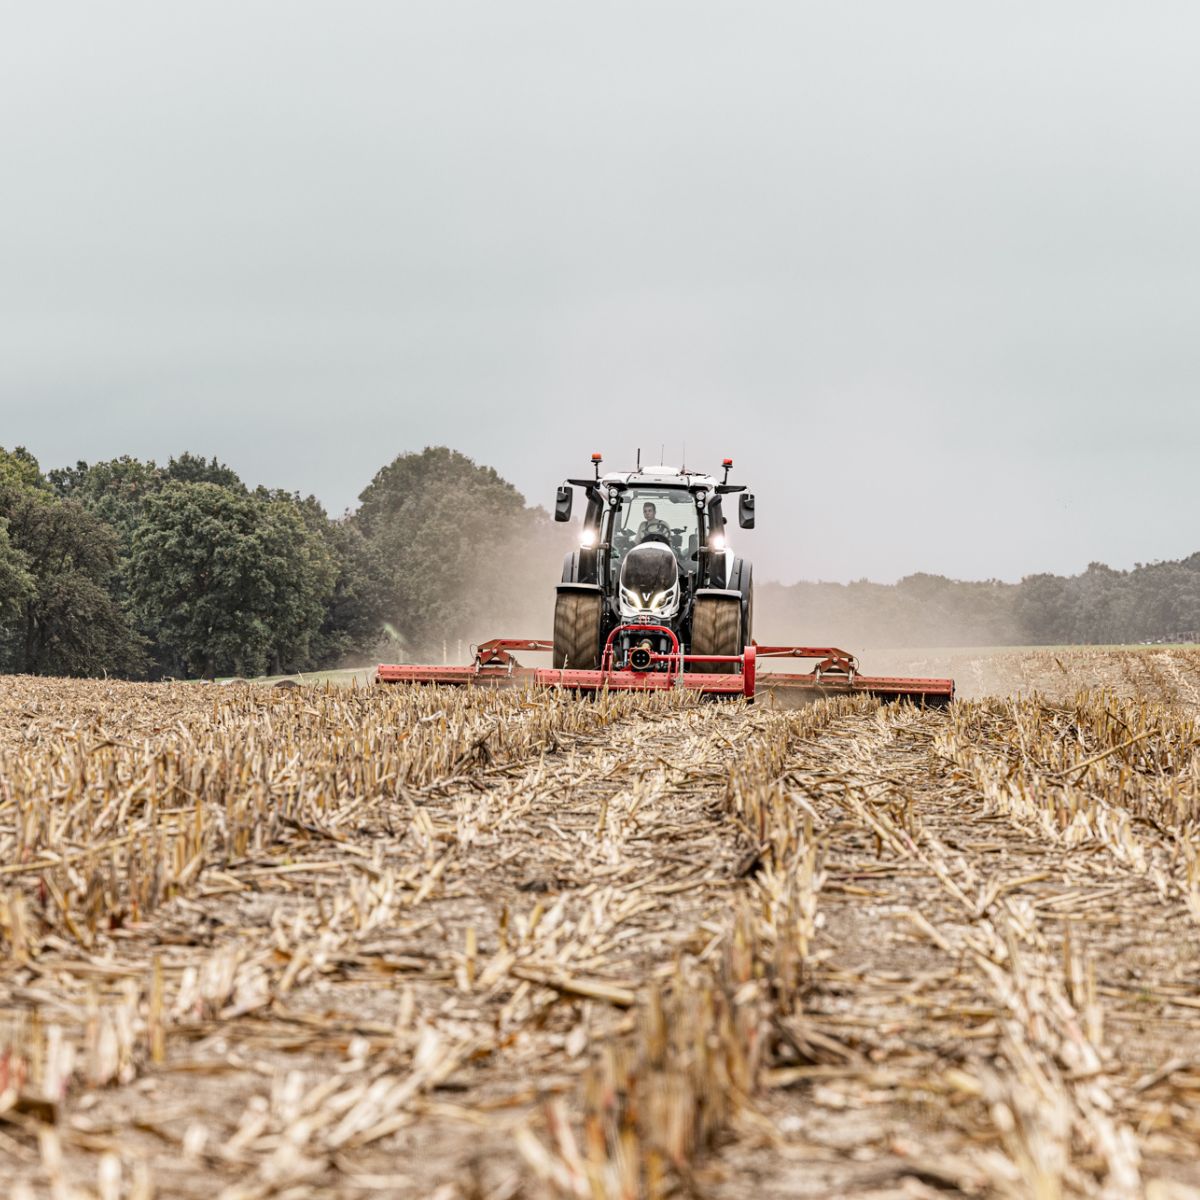 Reducing warranty costs of Valtra's tractors with Machine Learning